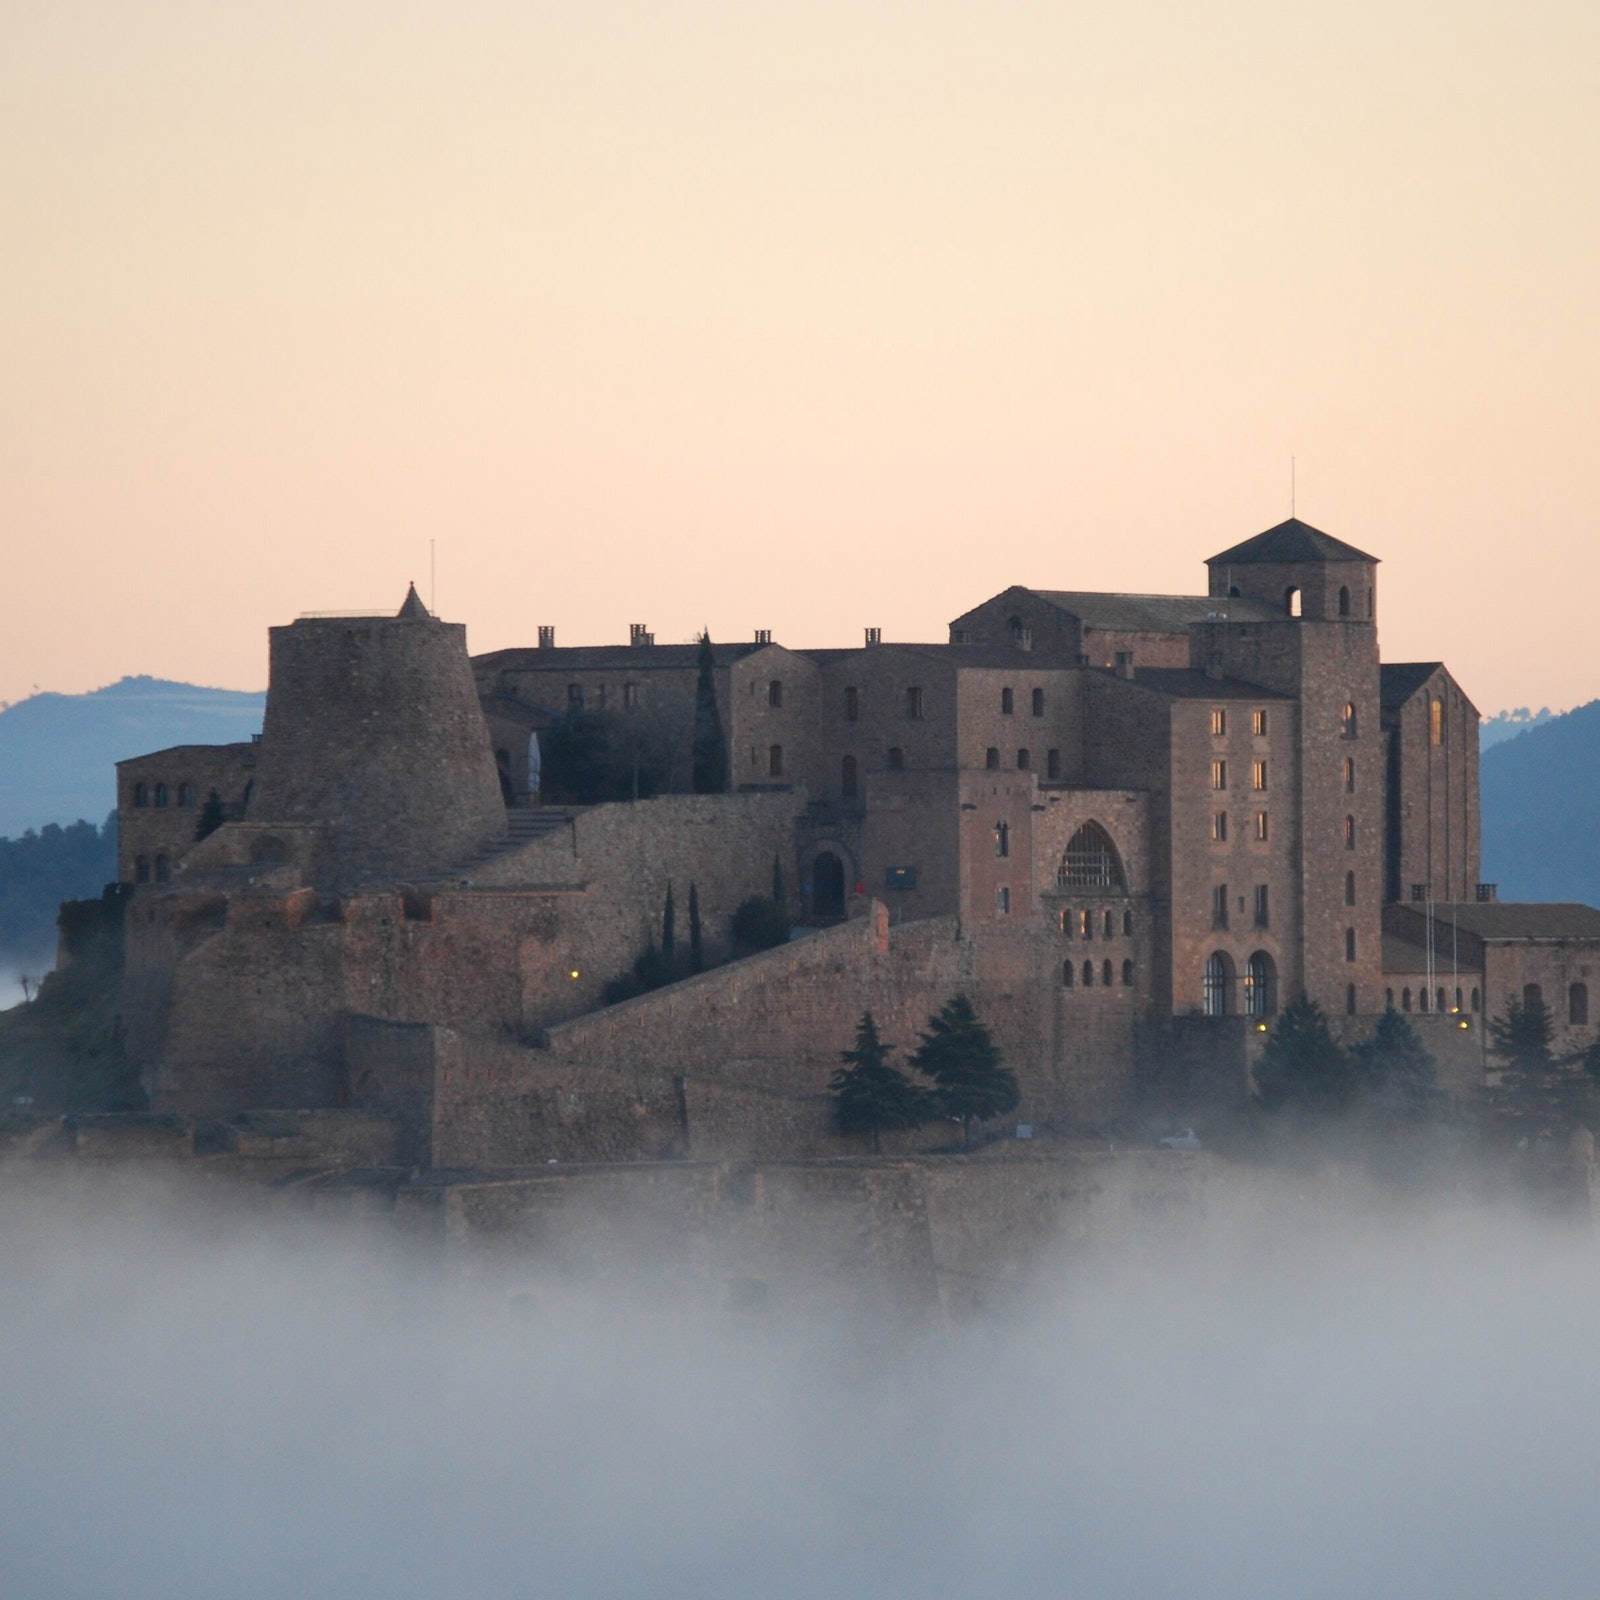 Castle of Cardona: Guided Visit in Spain